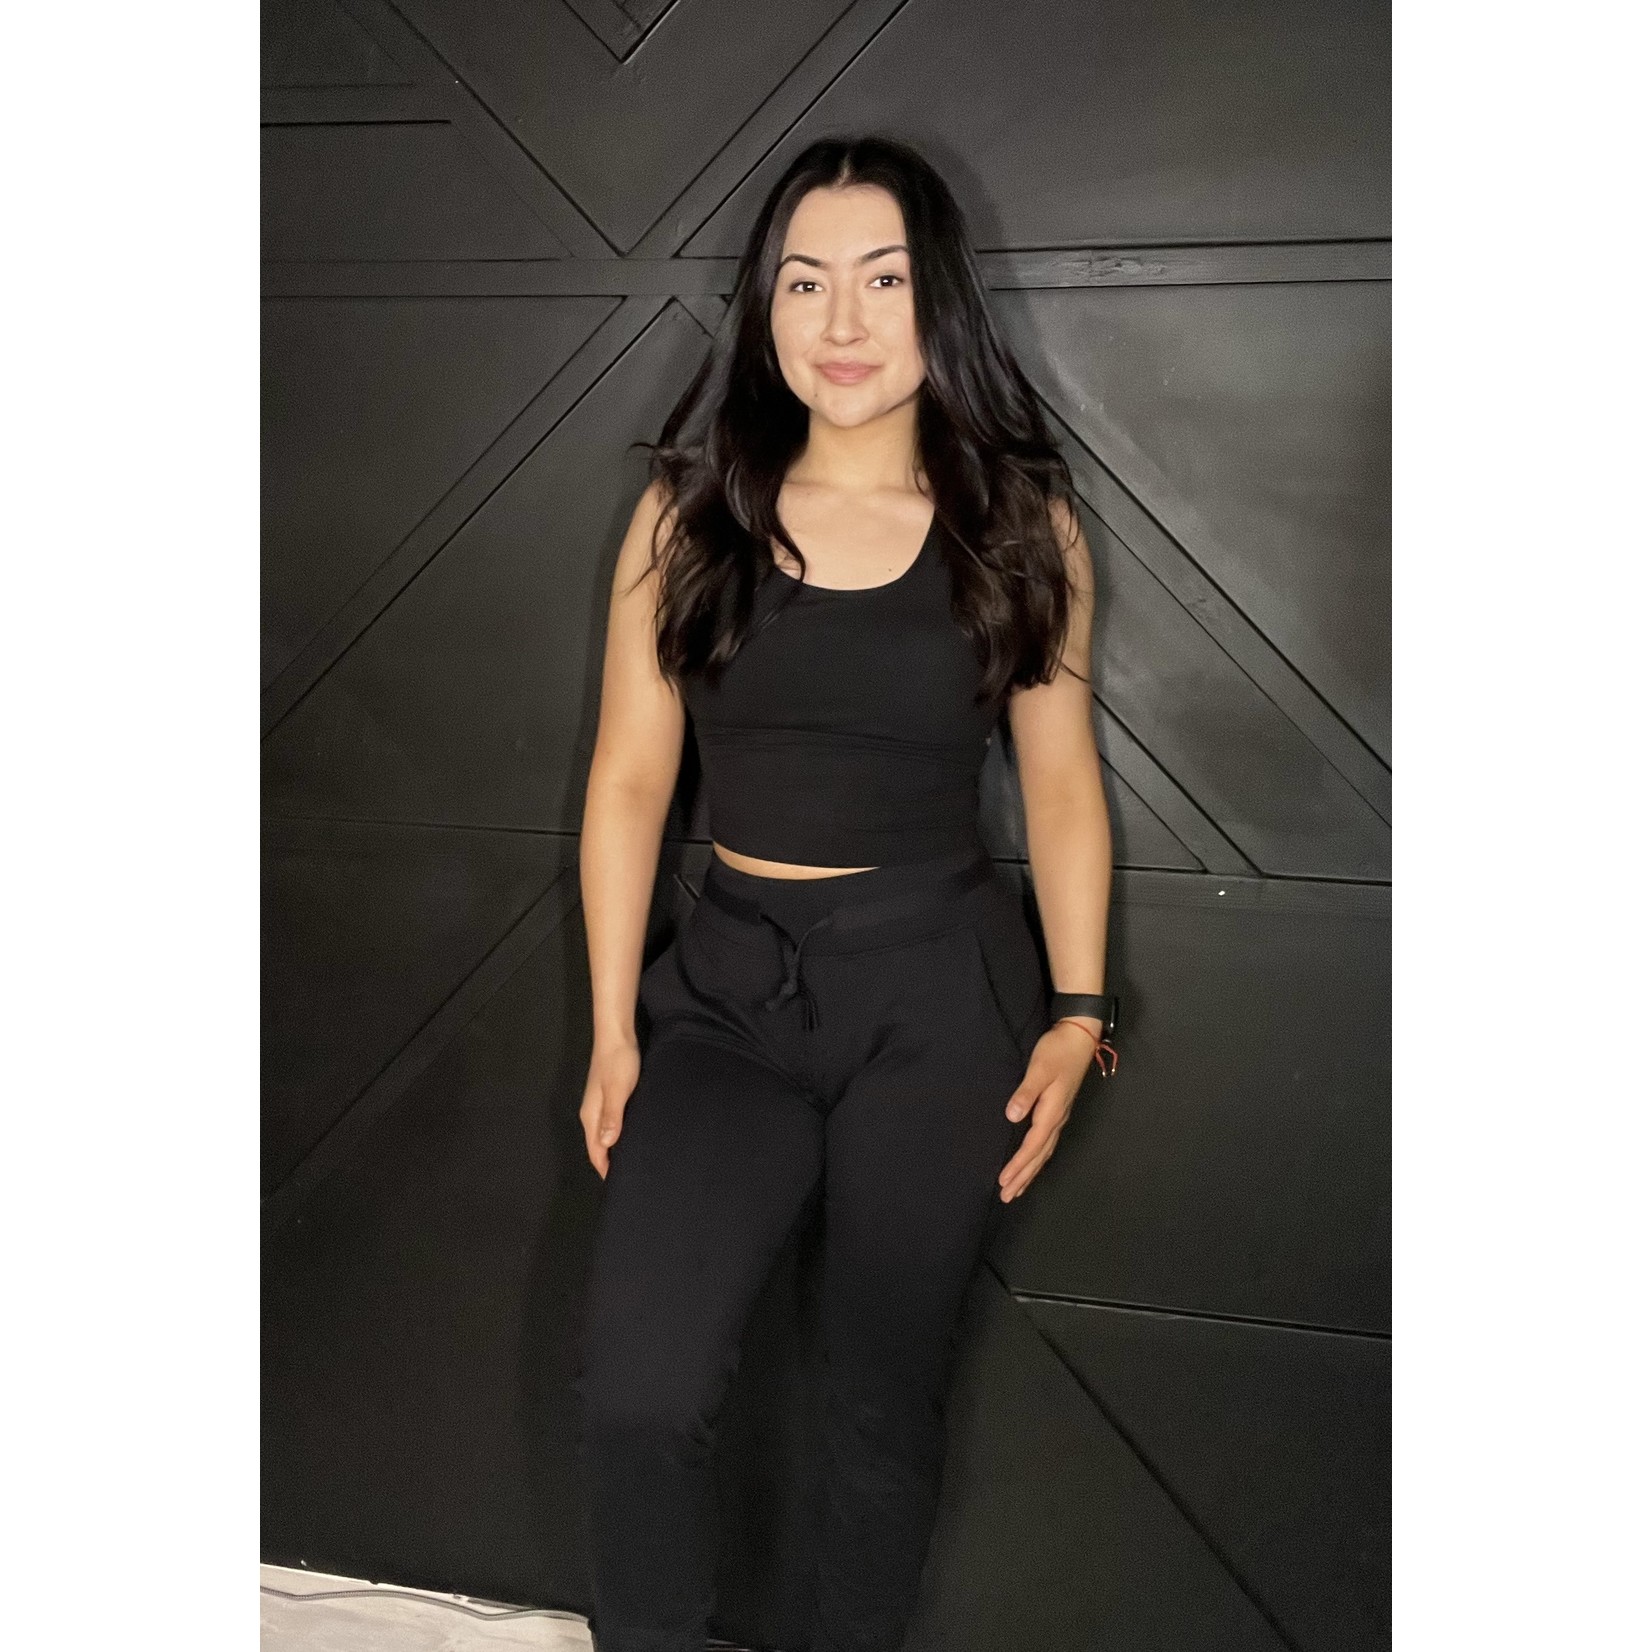 High waisted casual joggers / black - Untamed Athletics